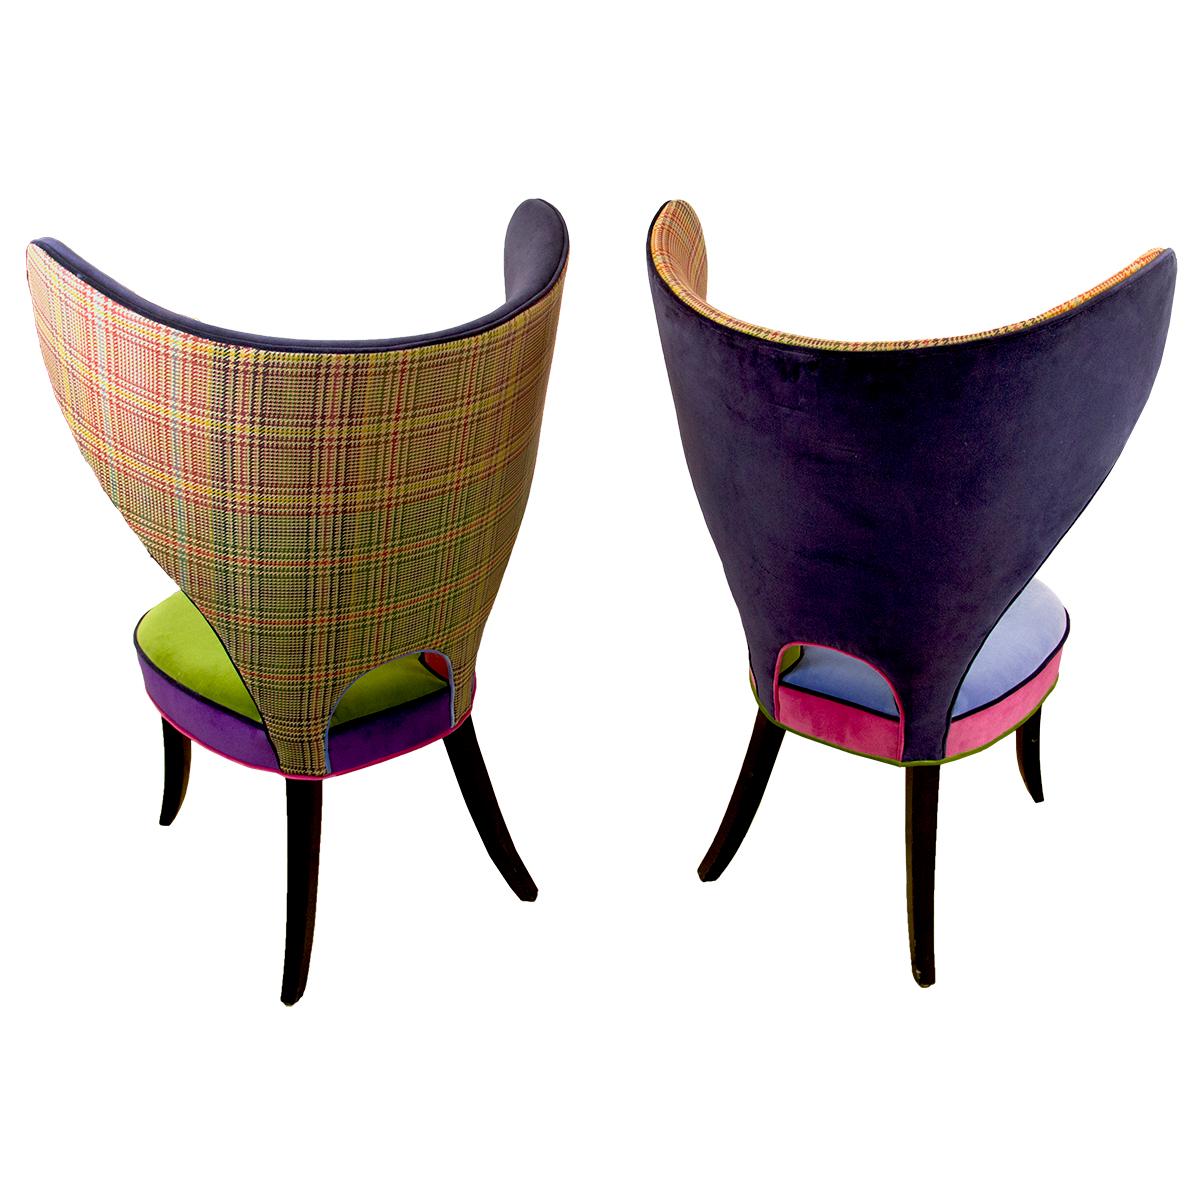 Pair of unique multi-fabric colorful upholstered modern wing chairs.